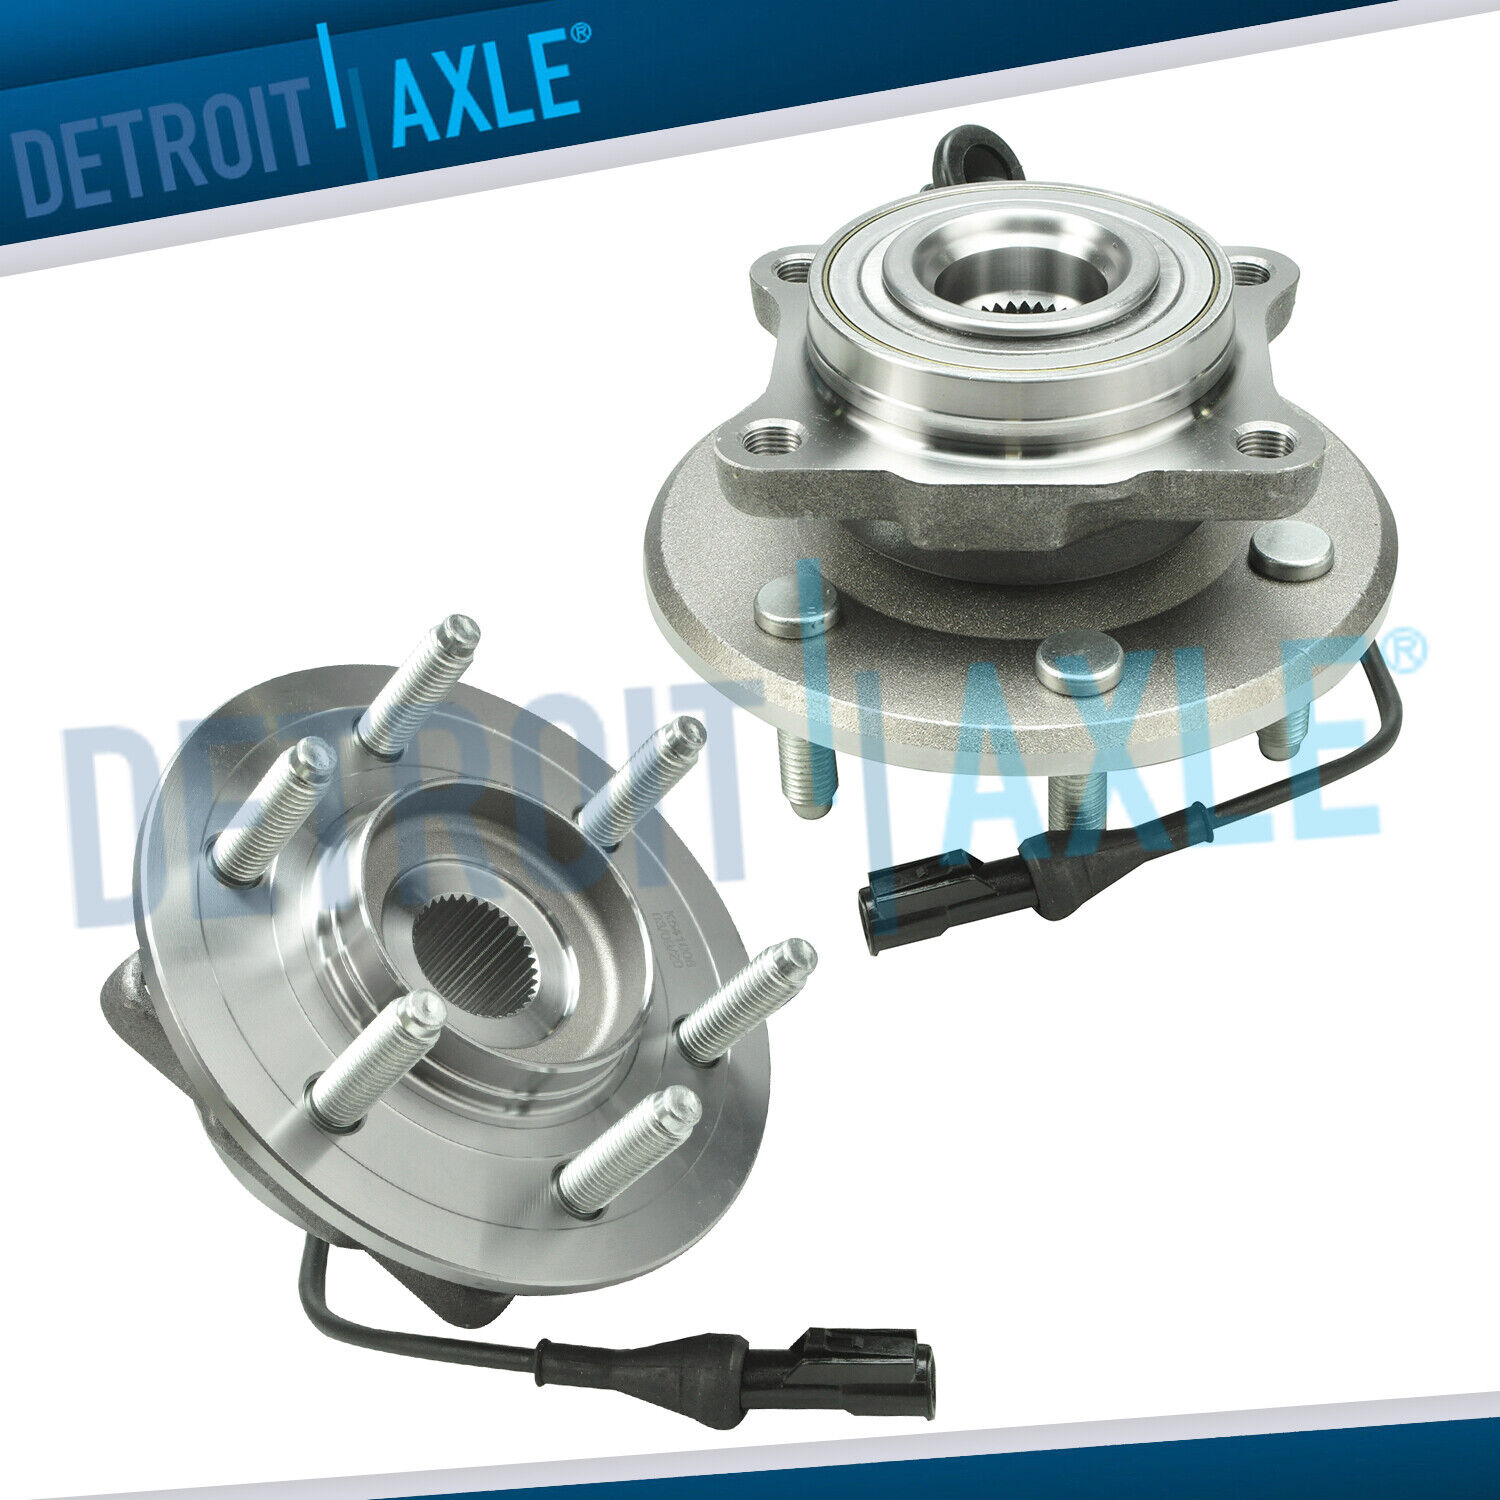 Set of (2) New REAR Wheel Hubs and Bearings for Ford Expedition Navigator w/ ABS